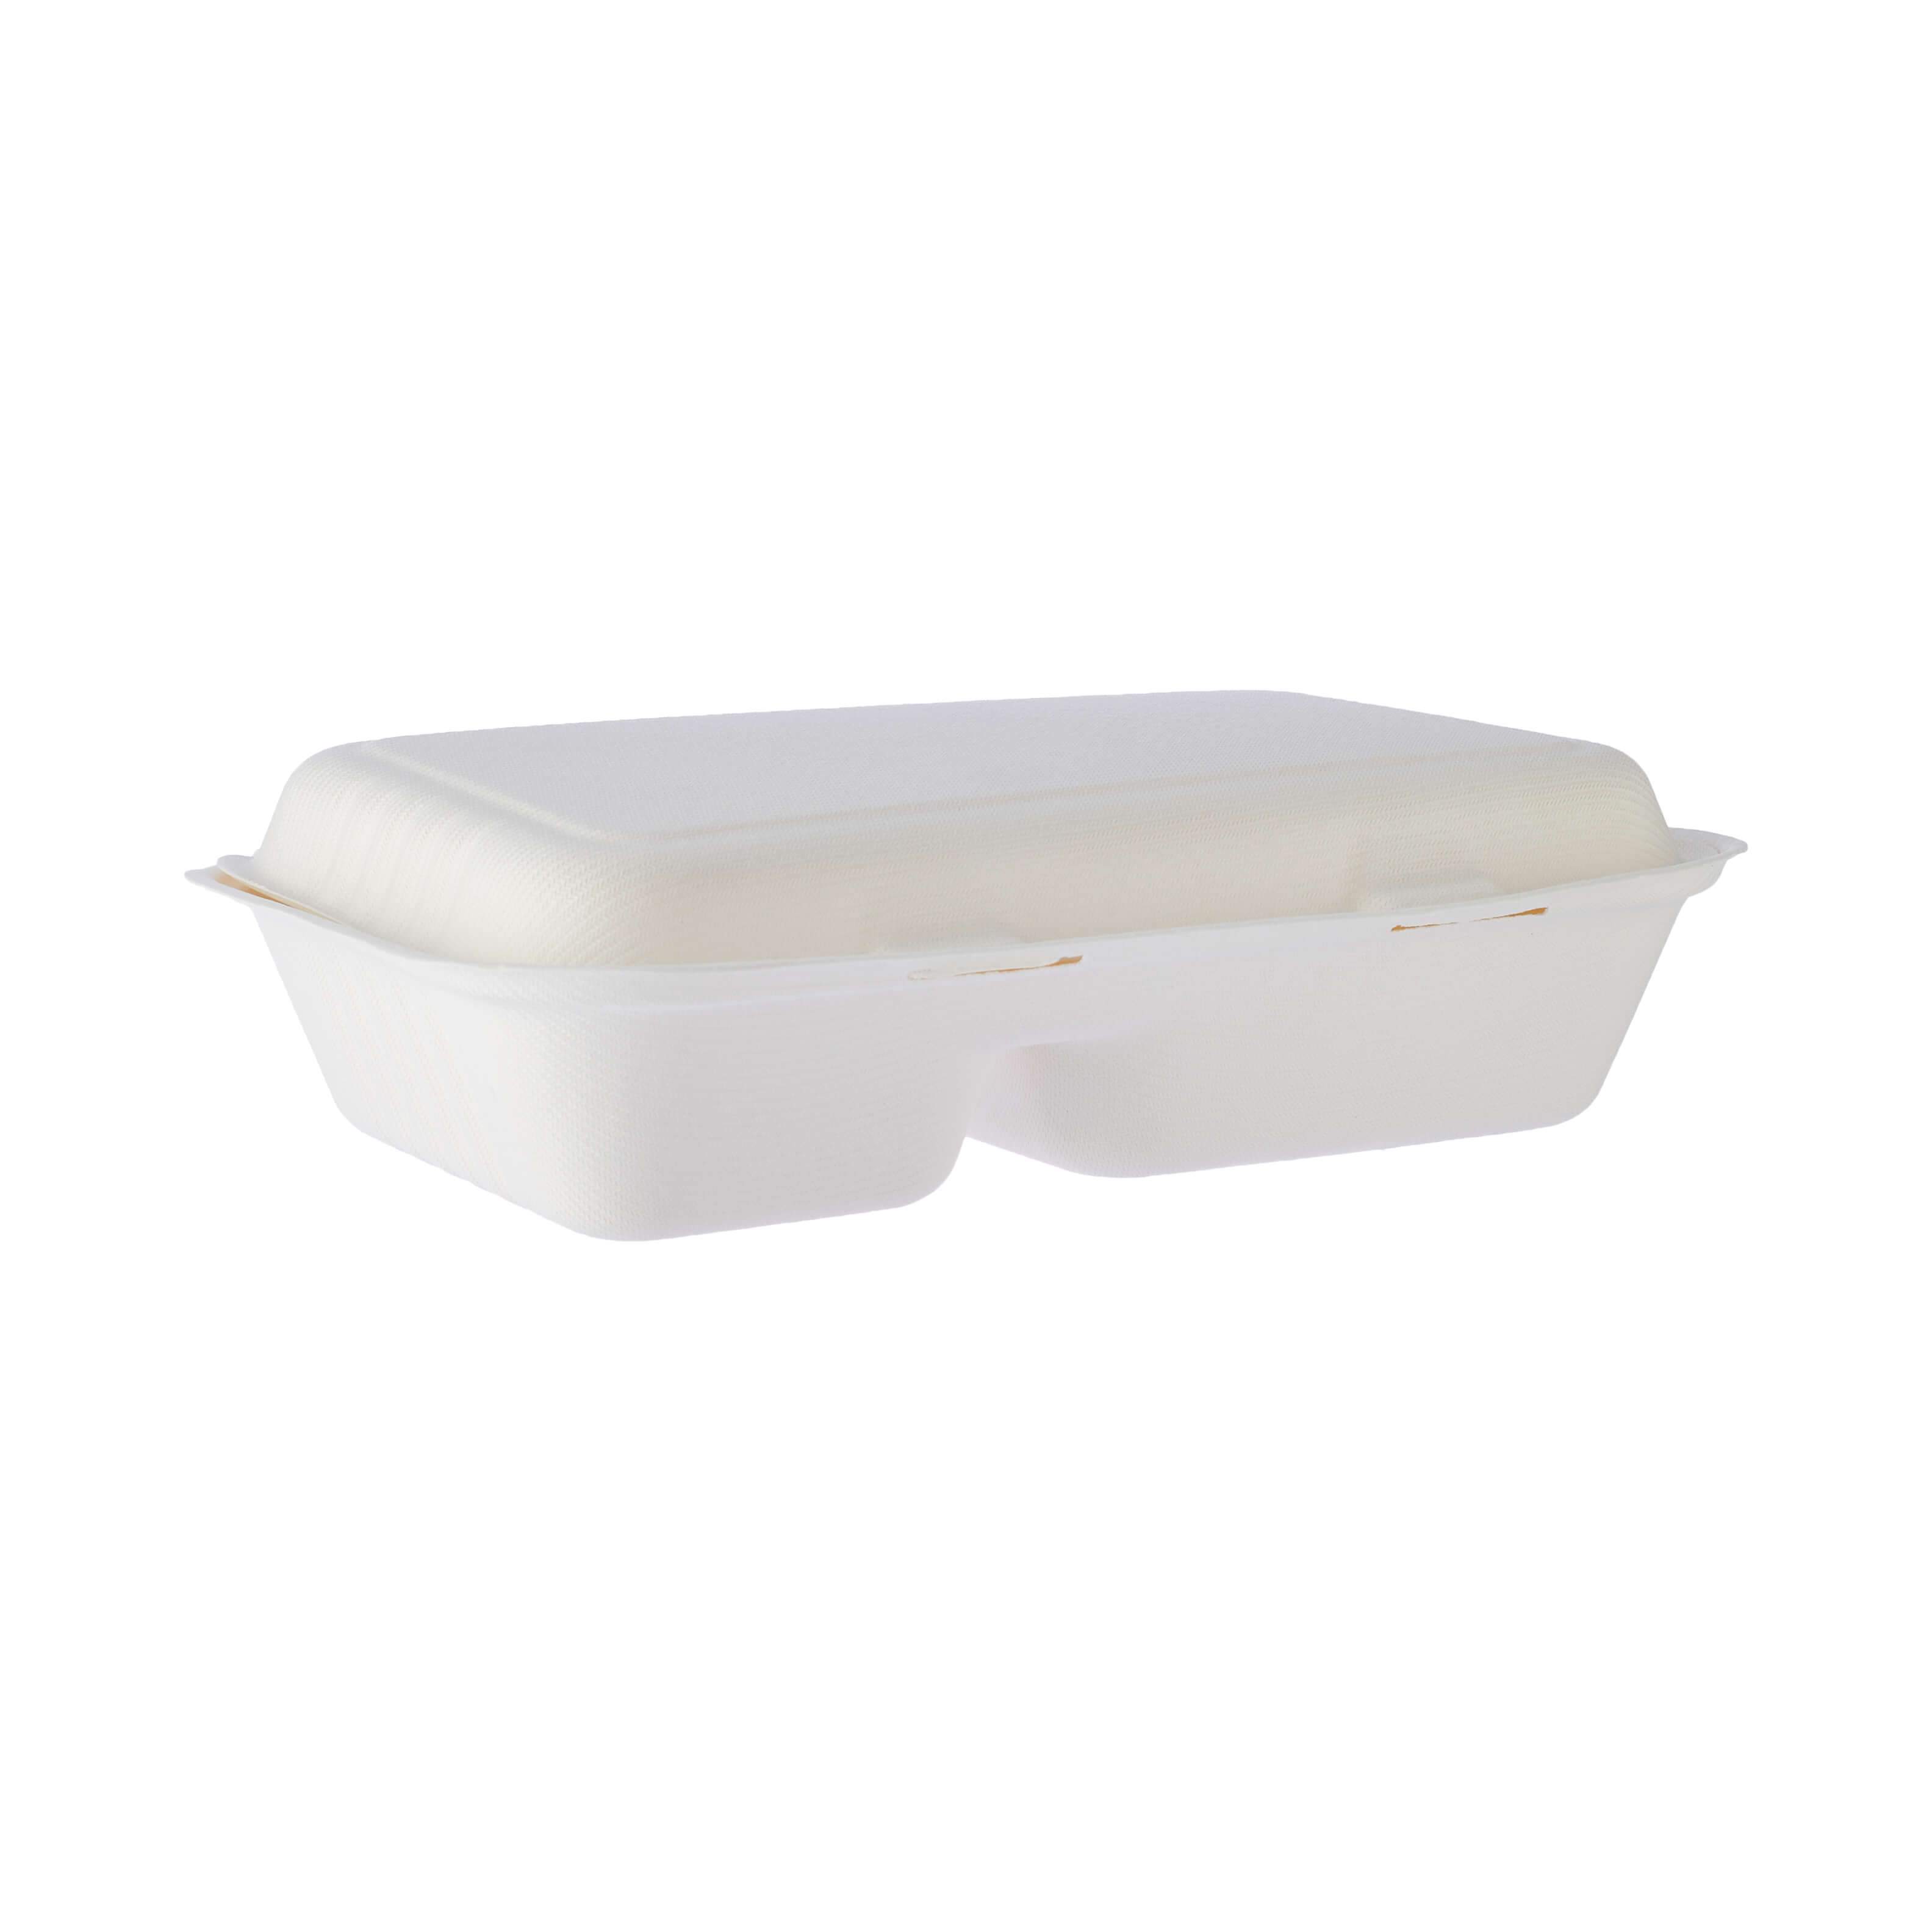 Bio degradable Lunch box in 2 compartment - 500 Pcs - Hotpack Oman